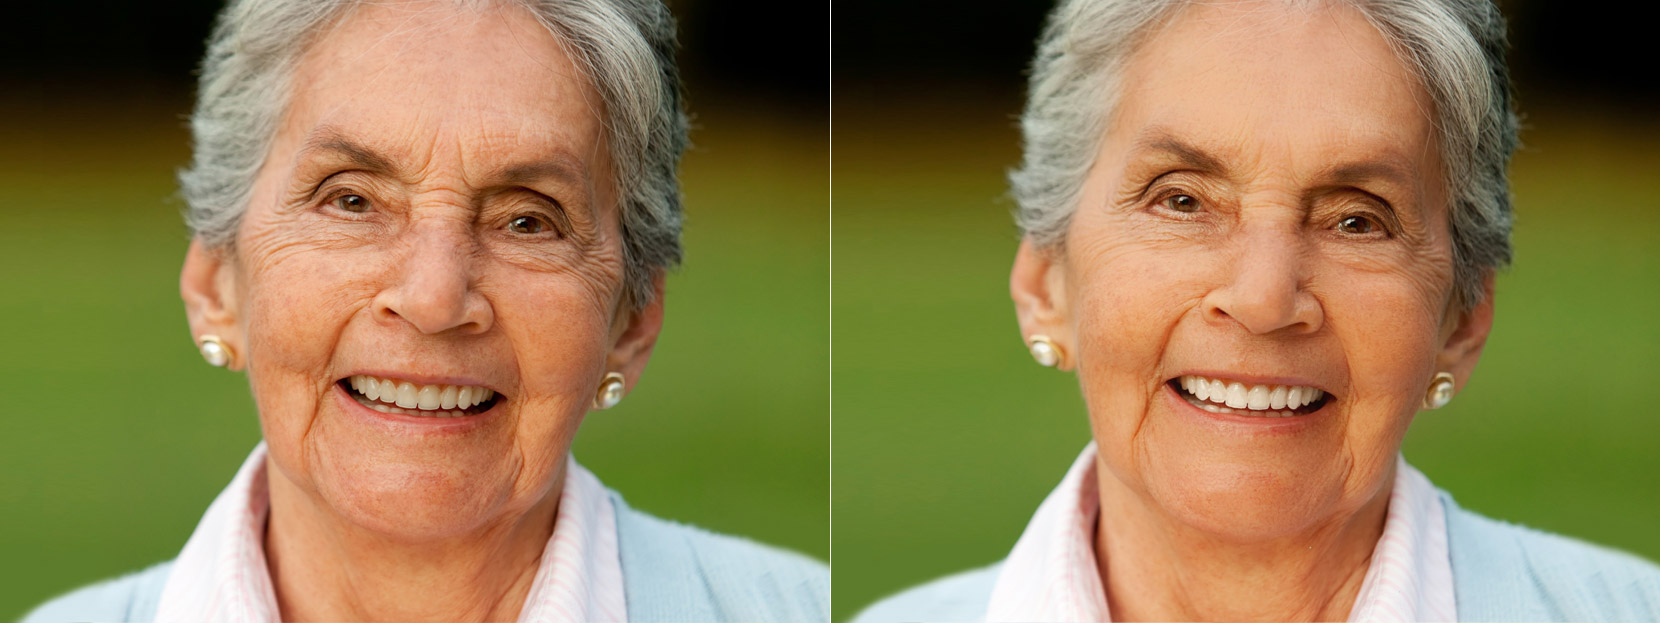 http://s.makeup.pho.to/images/makeup/face-retouch-old-woman.jpg